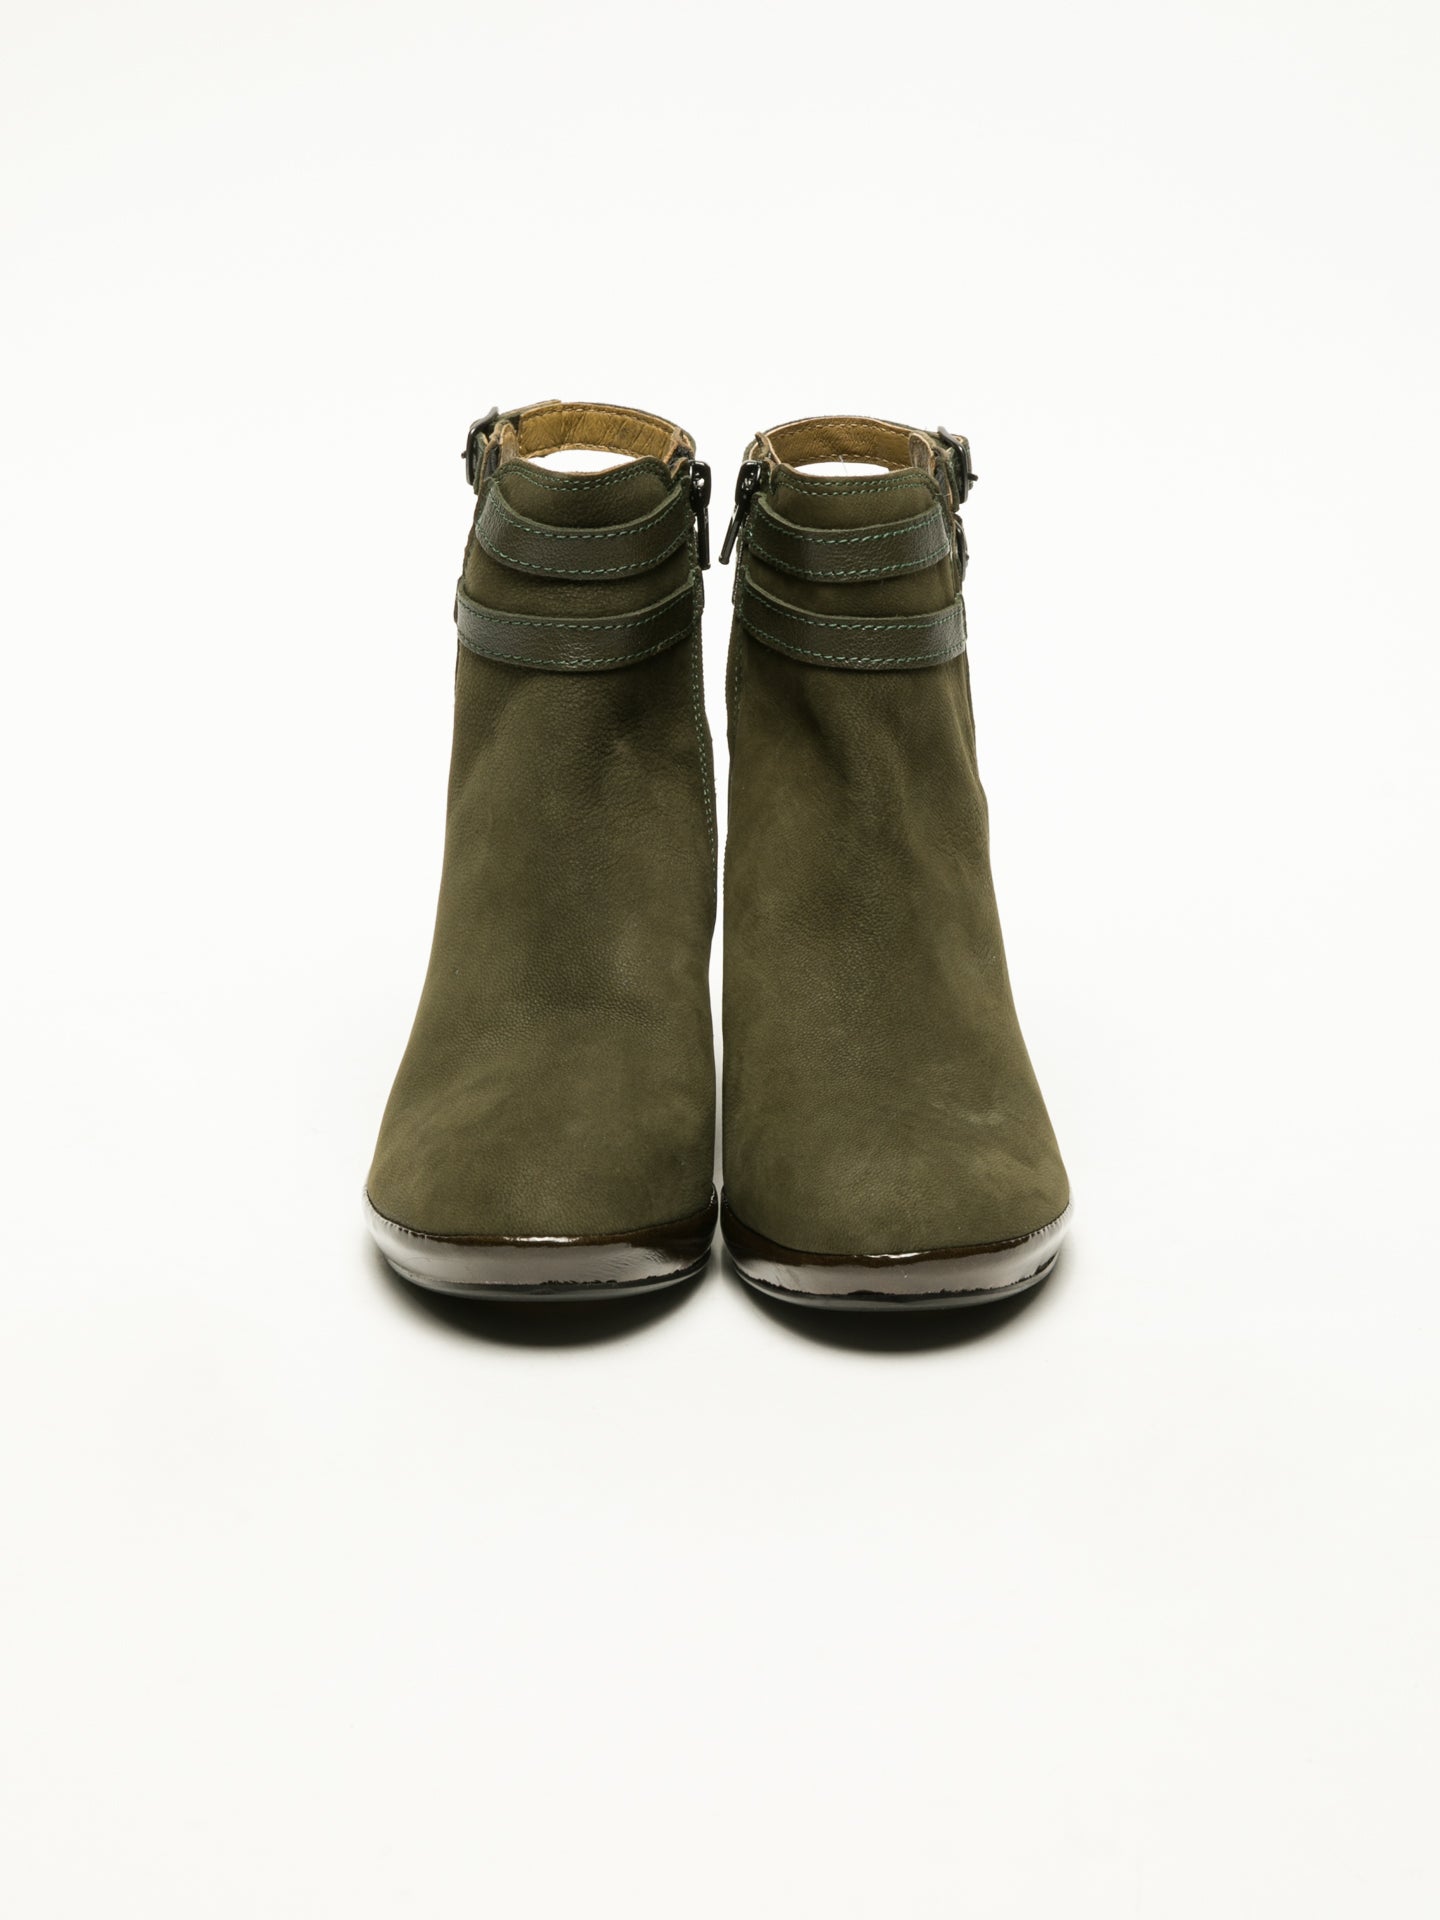 Fly London DarkGreen Buckle Ankle Boots